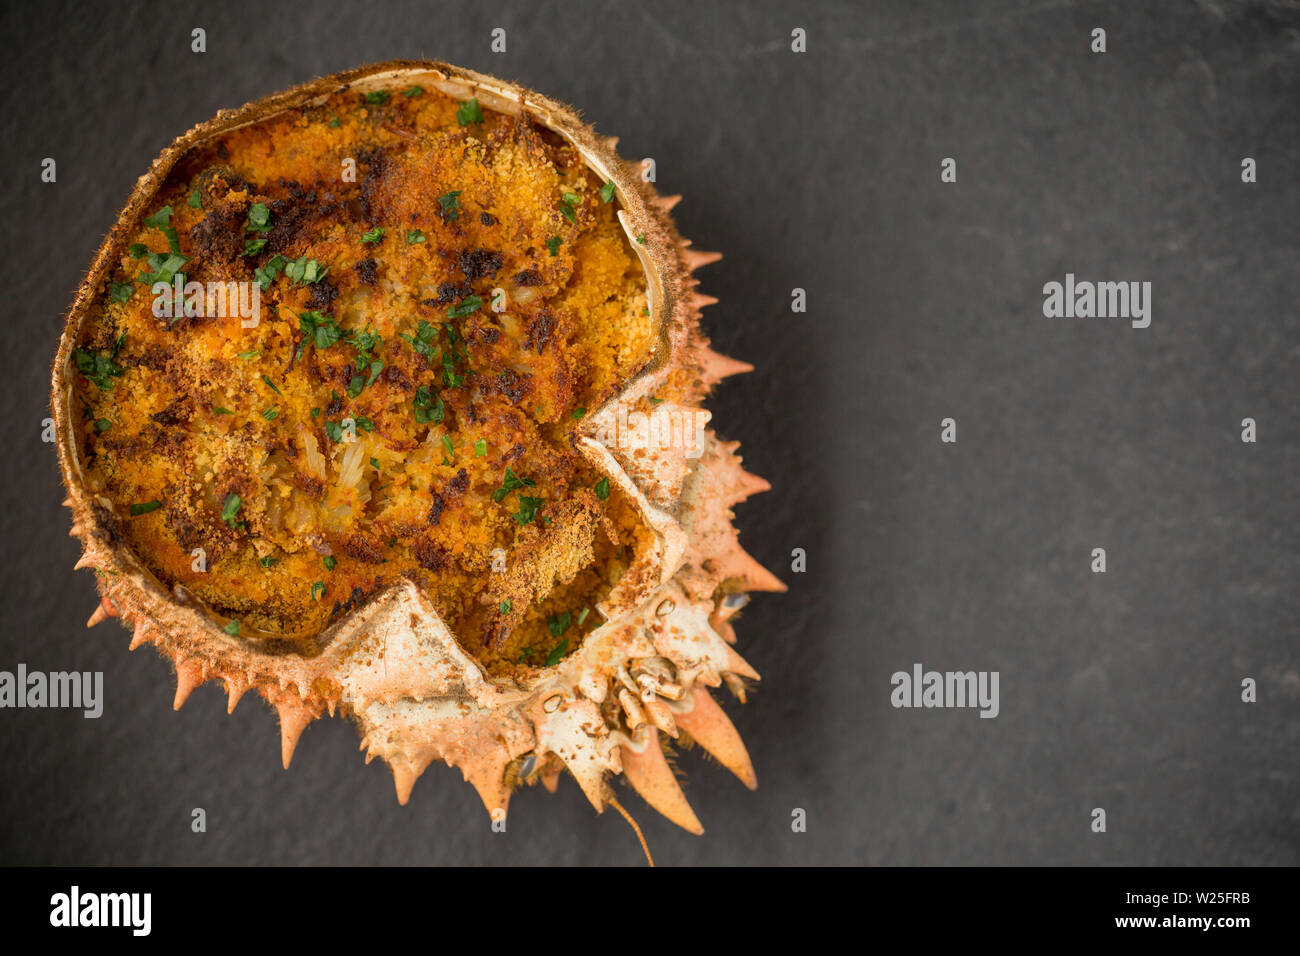 A homemade dish of baked spider crab based on the Basque dish of Txangurro or Changurro. The spider crab, Maja brachydactyla, was caught in the Englis Stock Photo